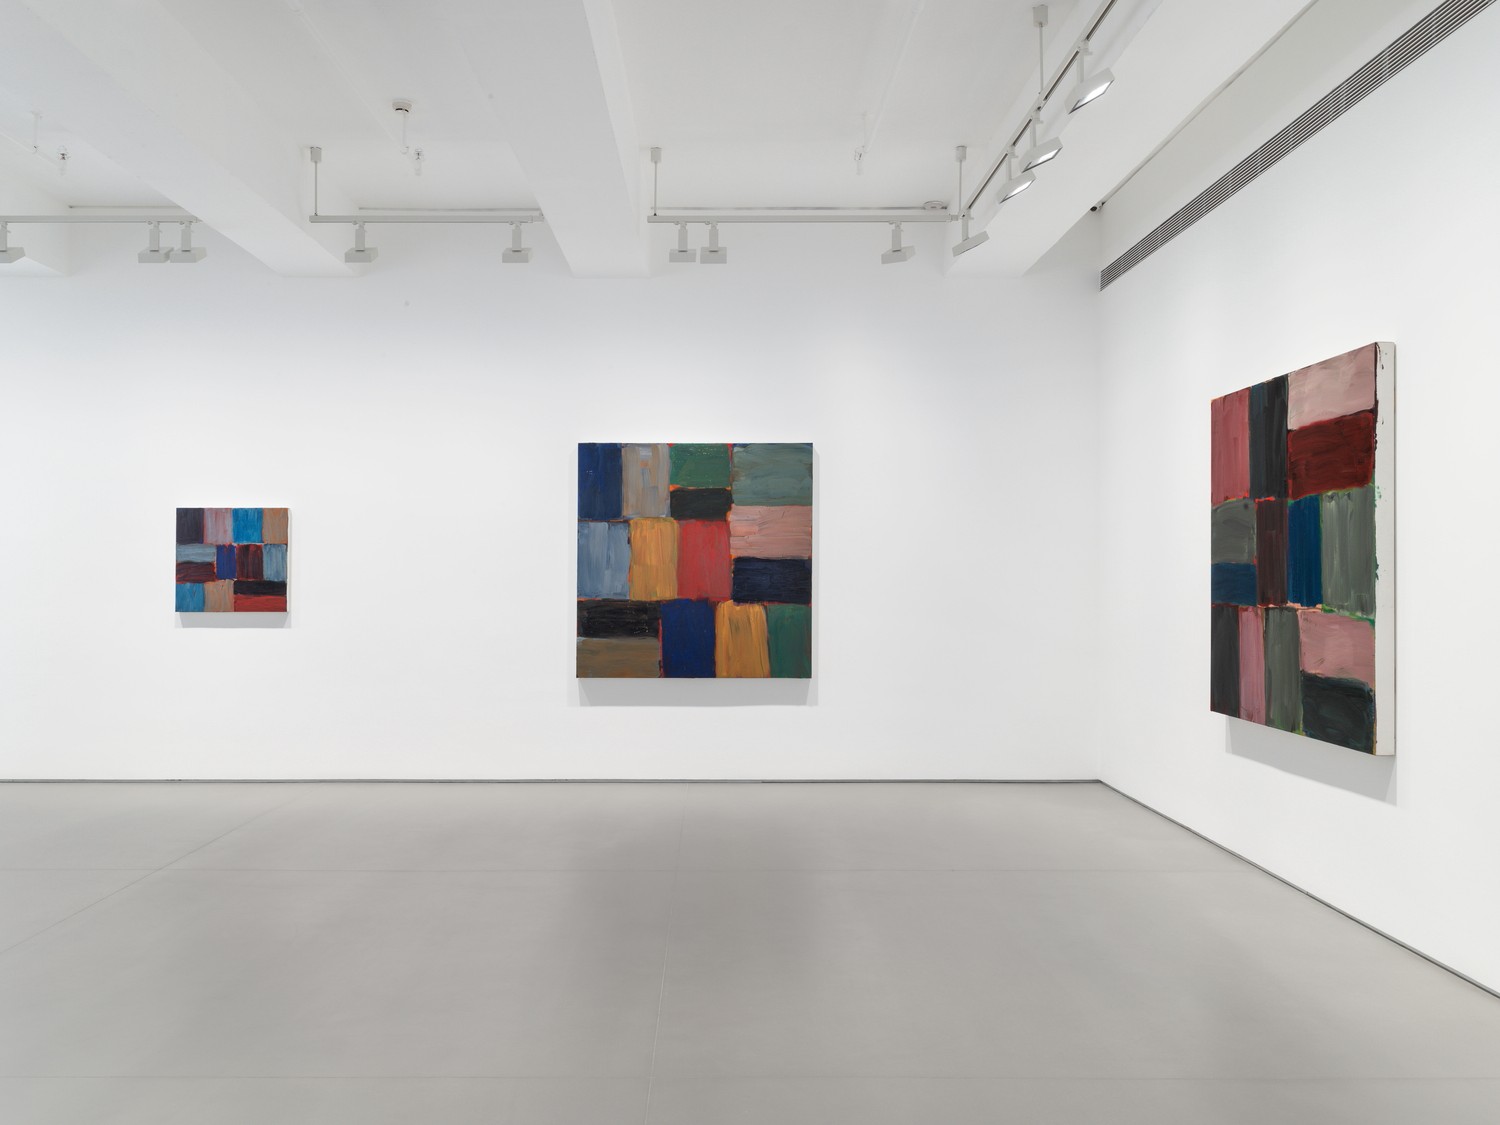 Installation image for Sean Scully: Wall of Light Land, at Lisson Gallery